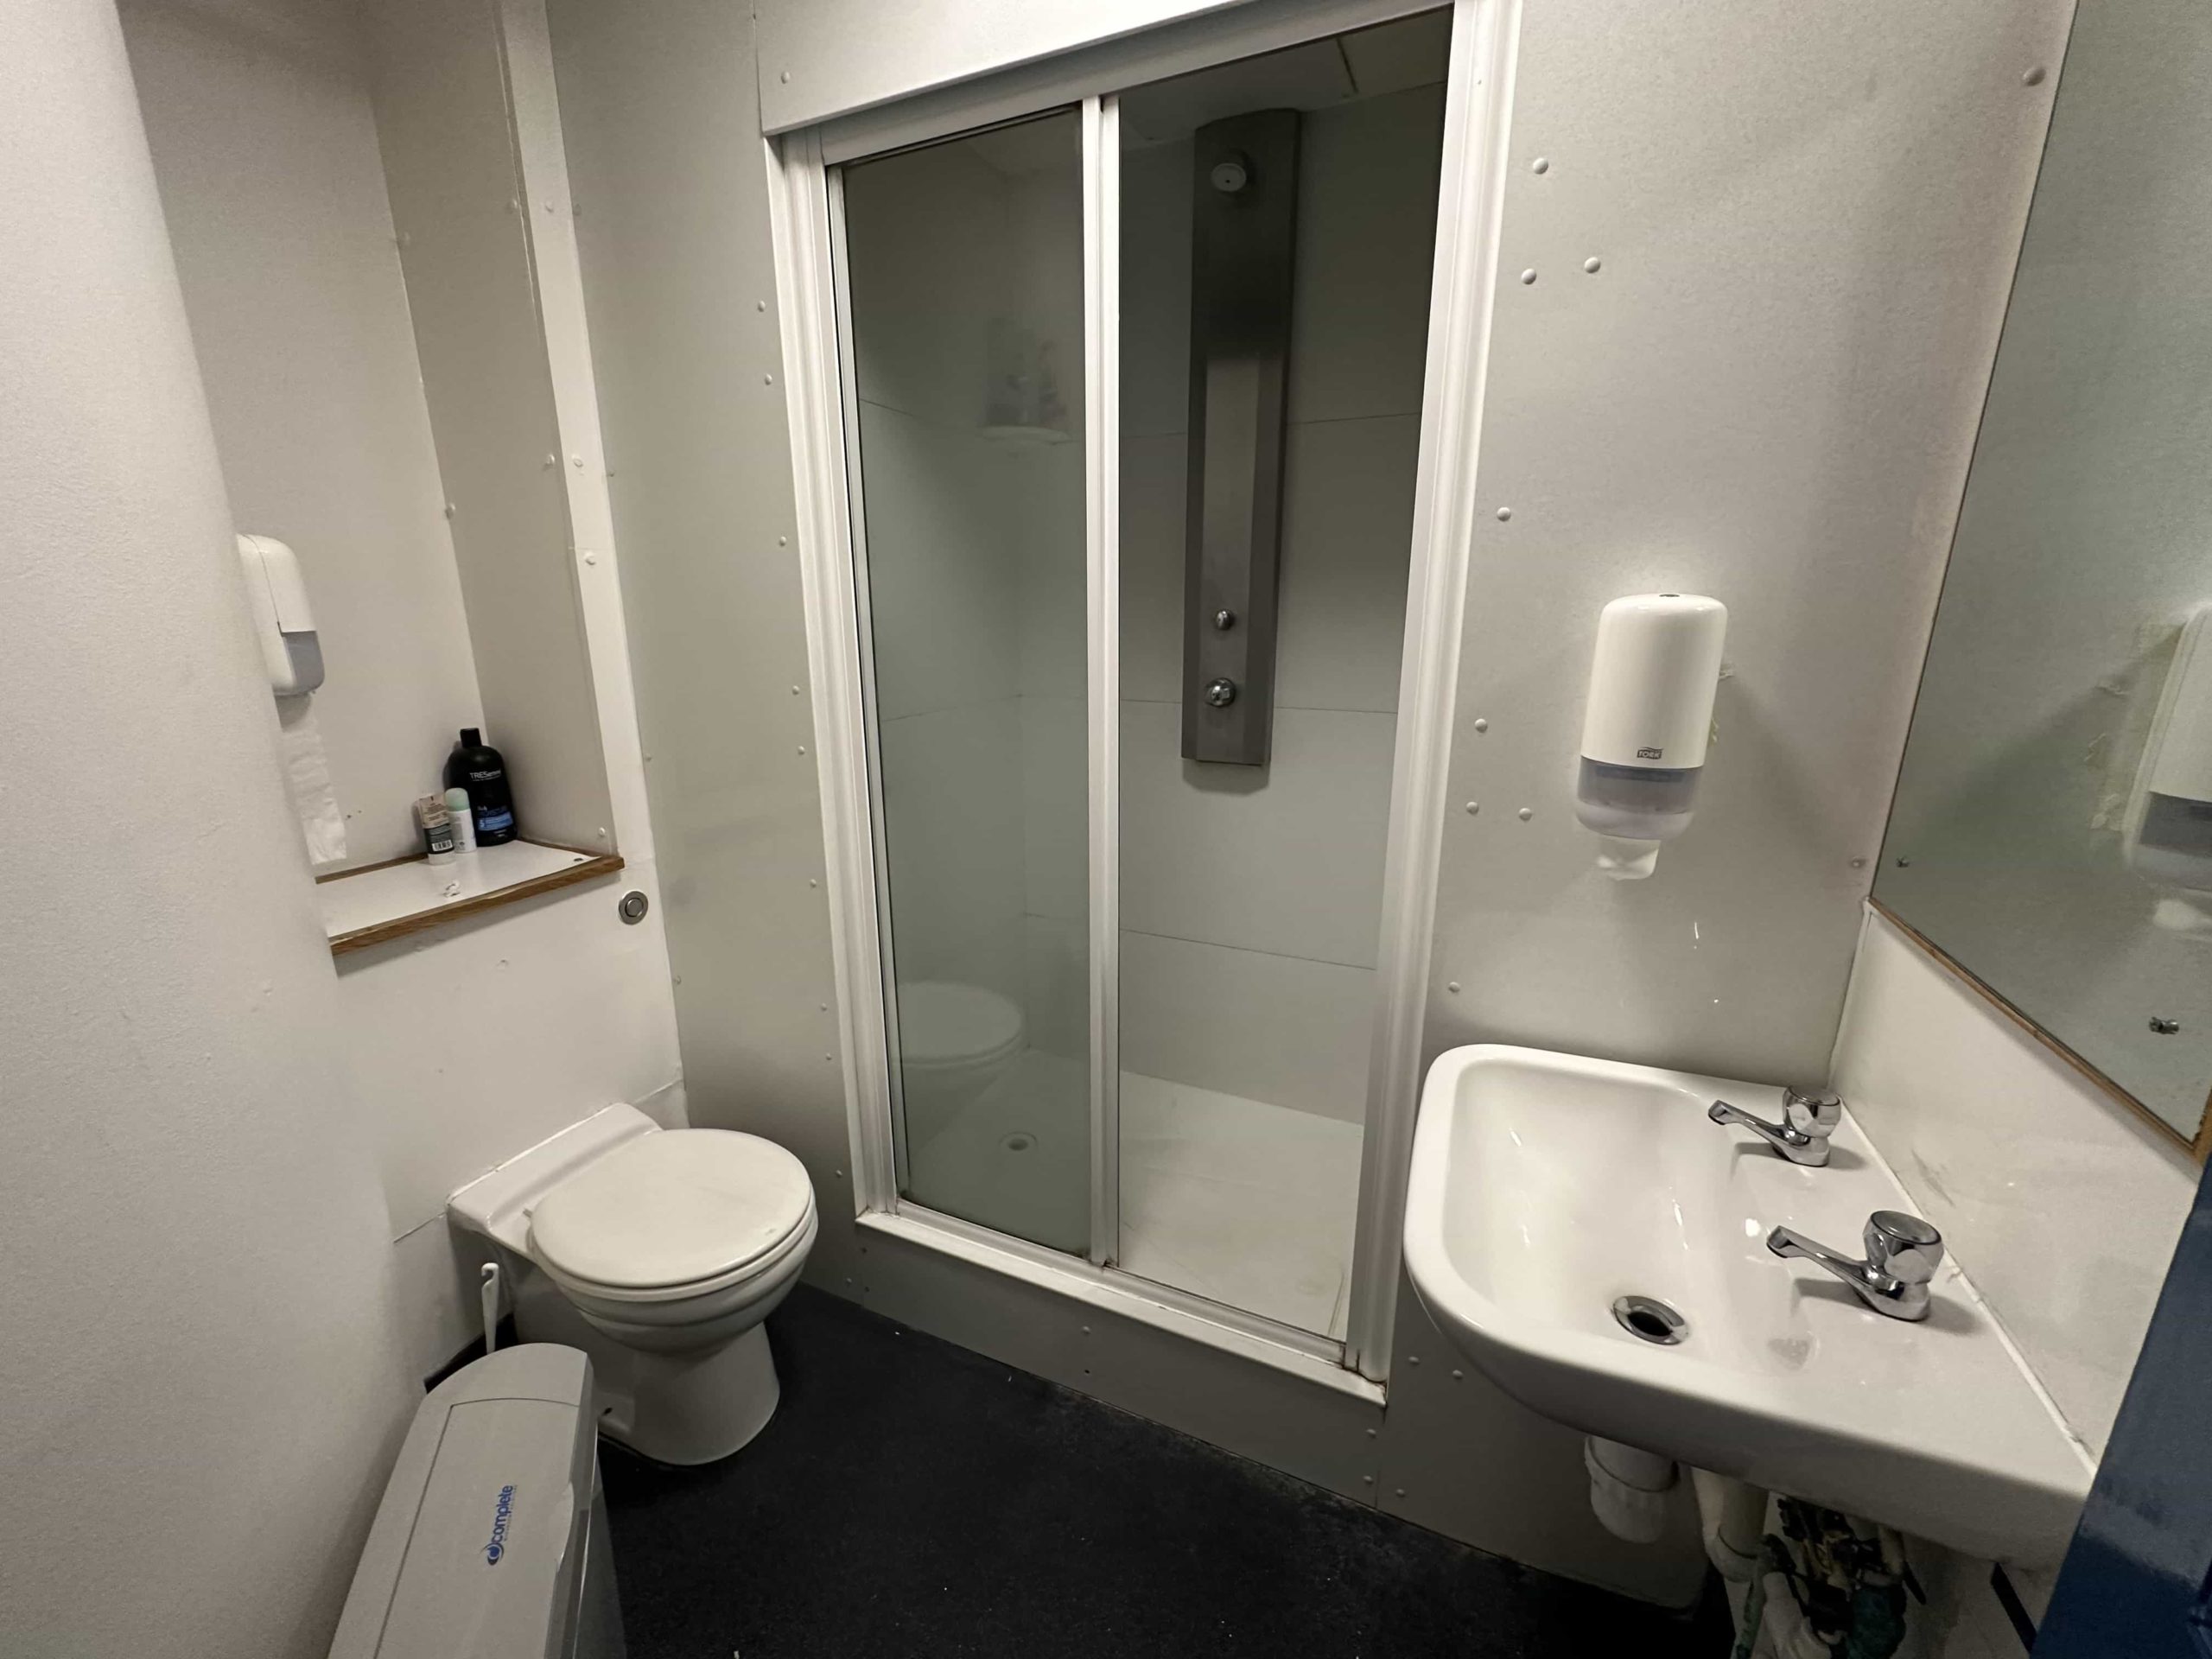 A small bathroom with a shower cubicle